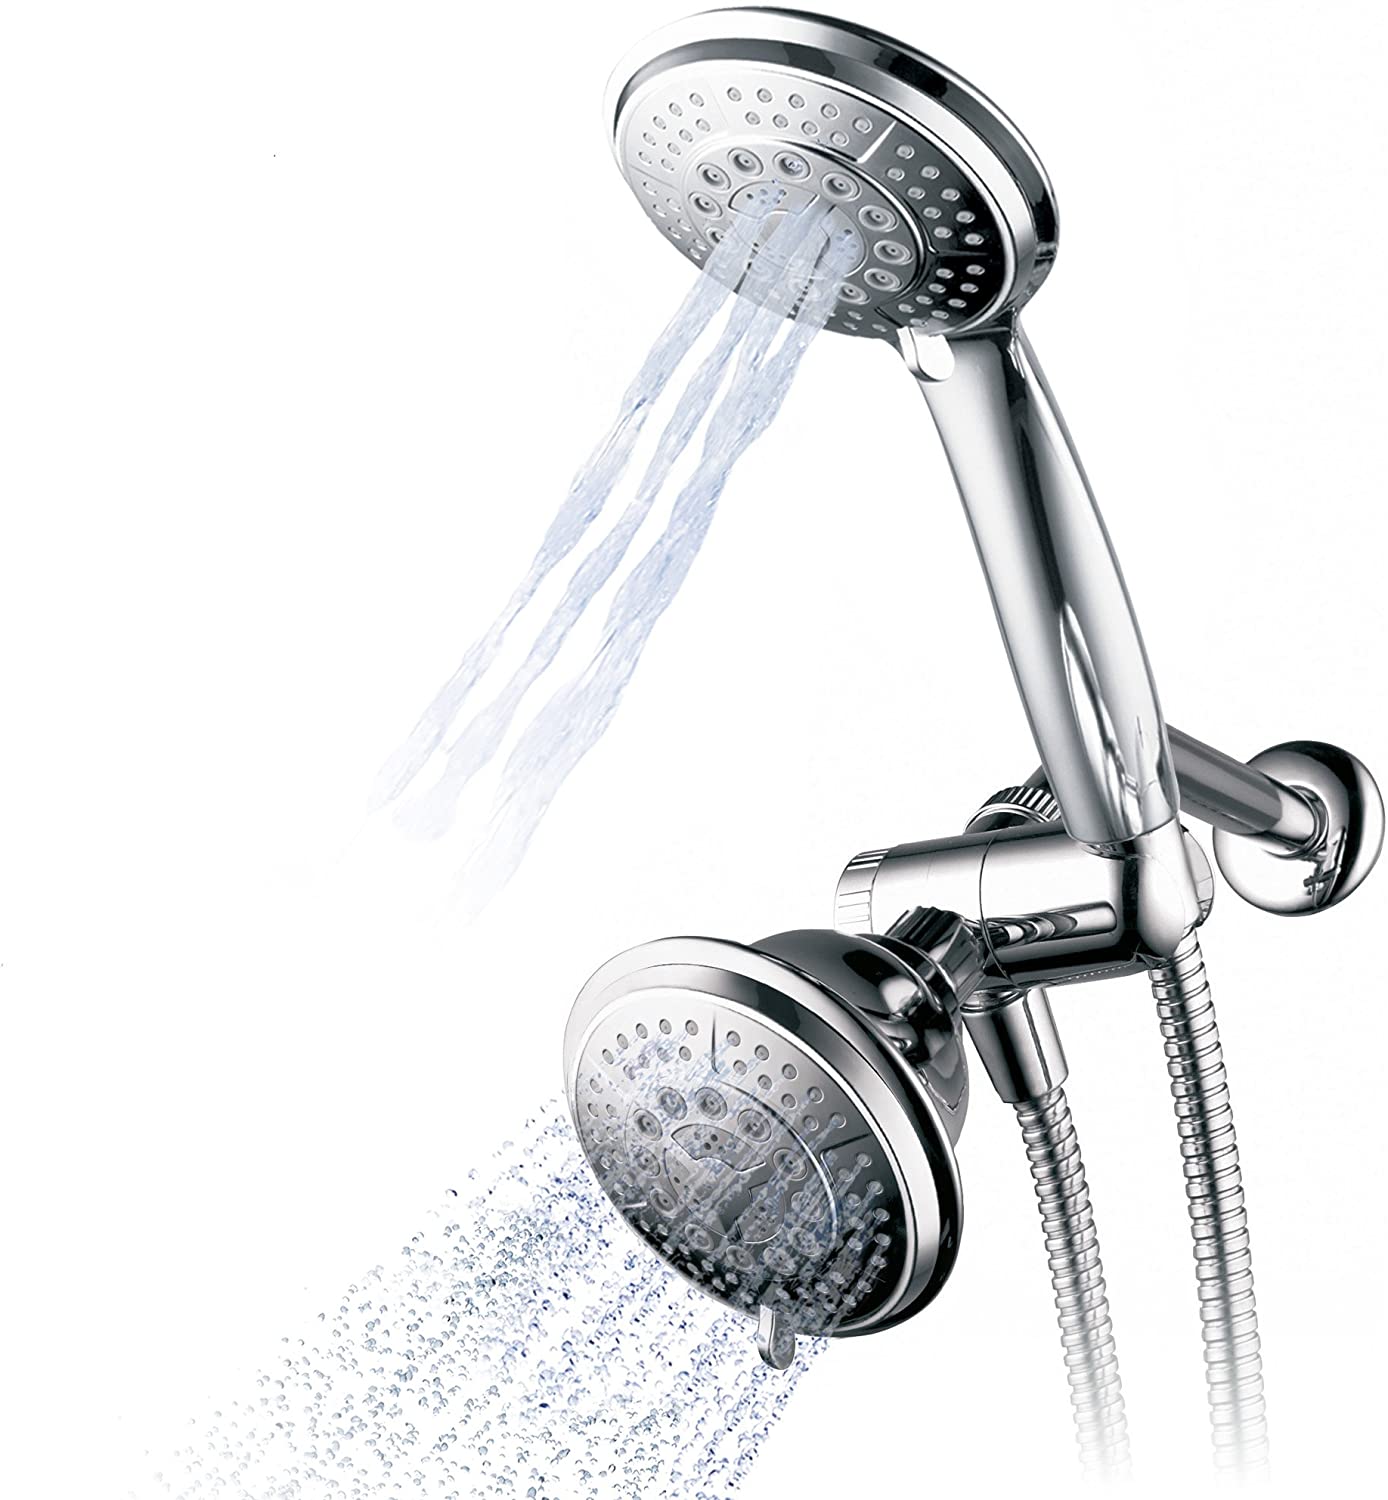 Review of Hydroluxe 1433 Handheld Showerhead & Rain Shower Combo. High Pressure 24 Function 4